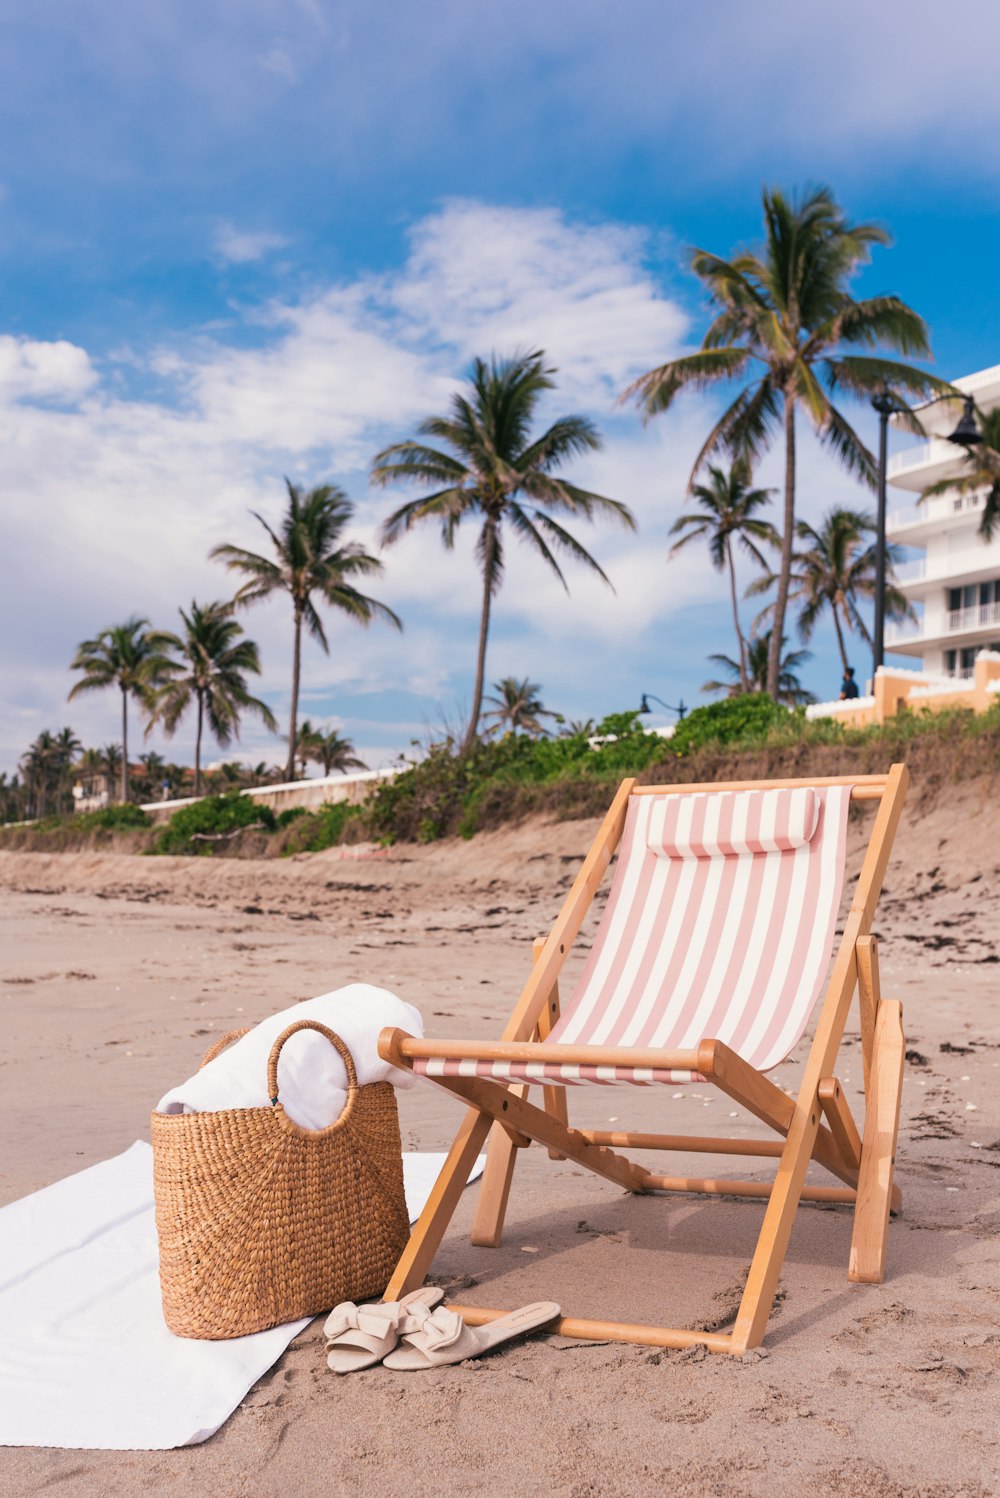 brown wicker basket near white flat sandals and beach chair on seashore under white and blue sky